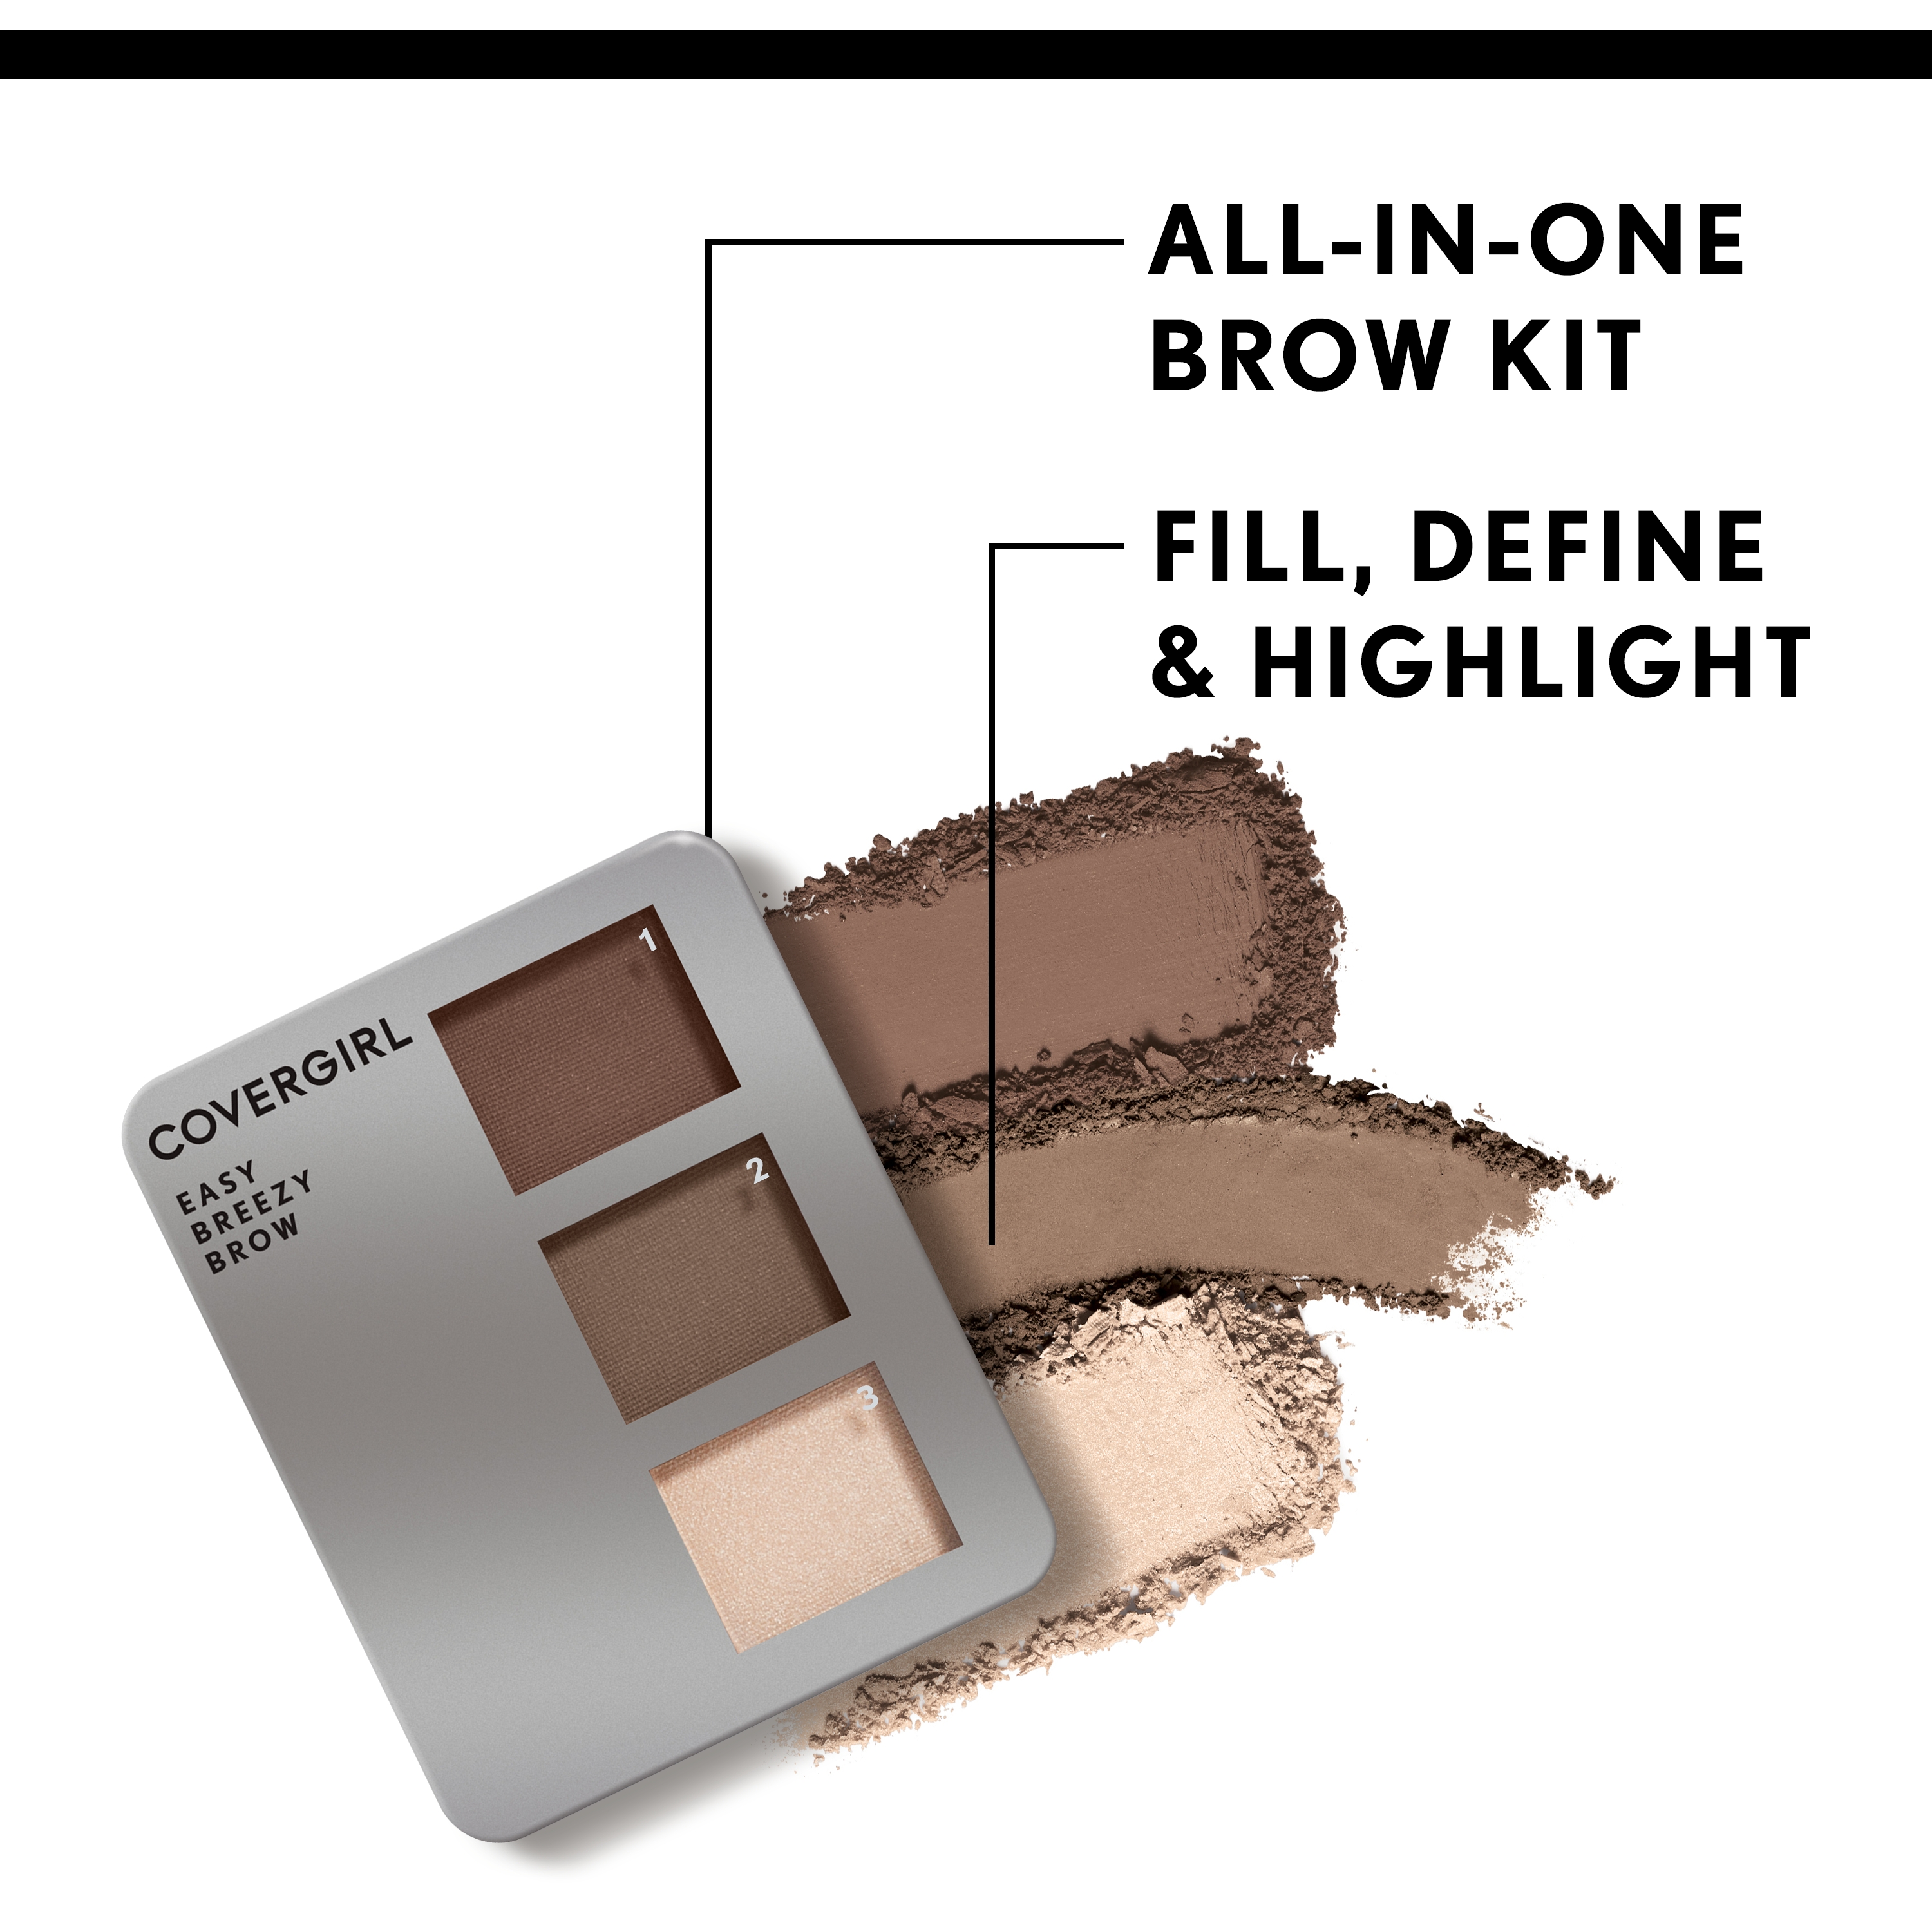 COVERGIRL Easy Breezy Brow Powder Kit, 705 Rich Brown, 0.008 oz, Eyebrow Powder, Eyebrow Kit, Eyebrow Powder Kit, Eyebrows, Includes Double-Ended Fluffy and Angeled Brush - image 3 of 8